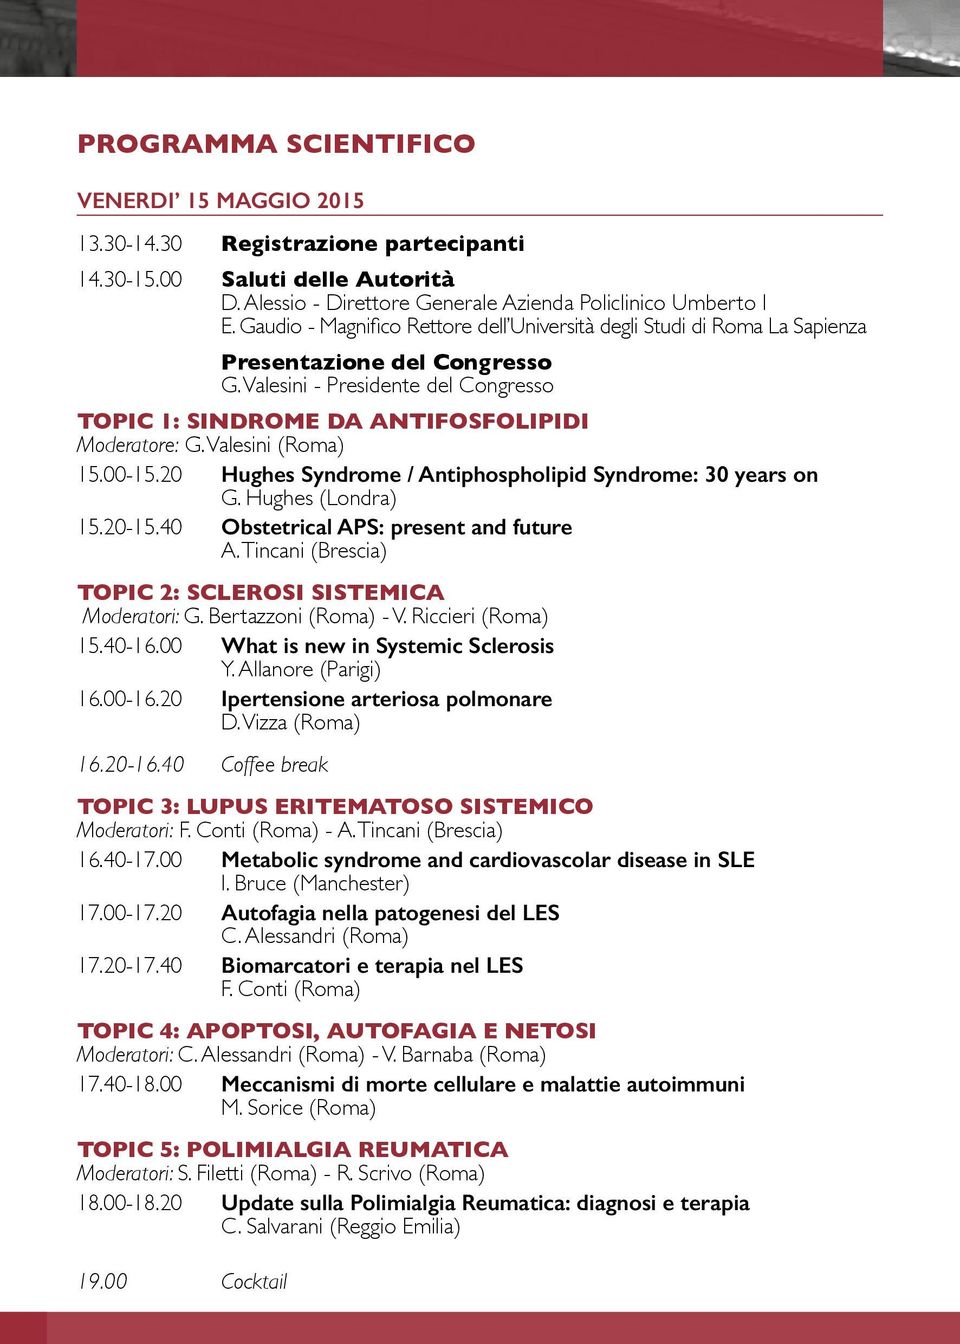 Valesini (Roma) 15.00-15.20 Hughes Syndrome / Antiphospholipid Syndrome: 30 years on G. Hughes (Londra) 15.20-15.40 Obstetrical APS: present and future A.